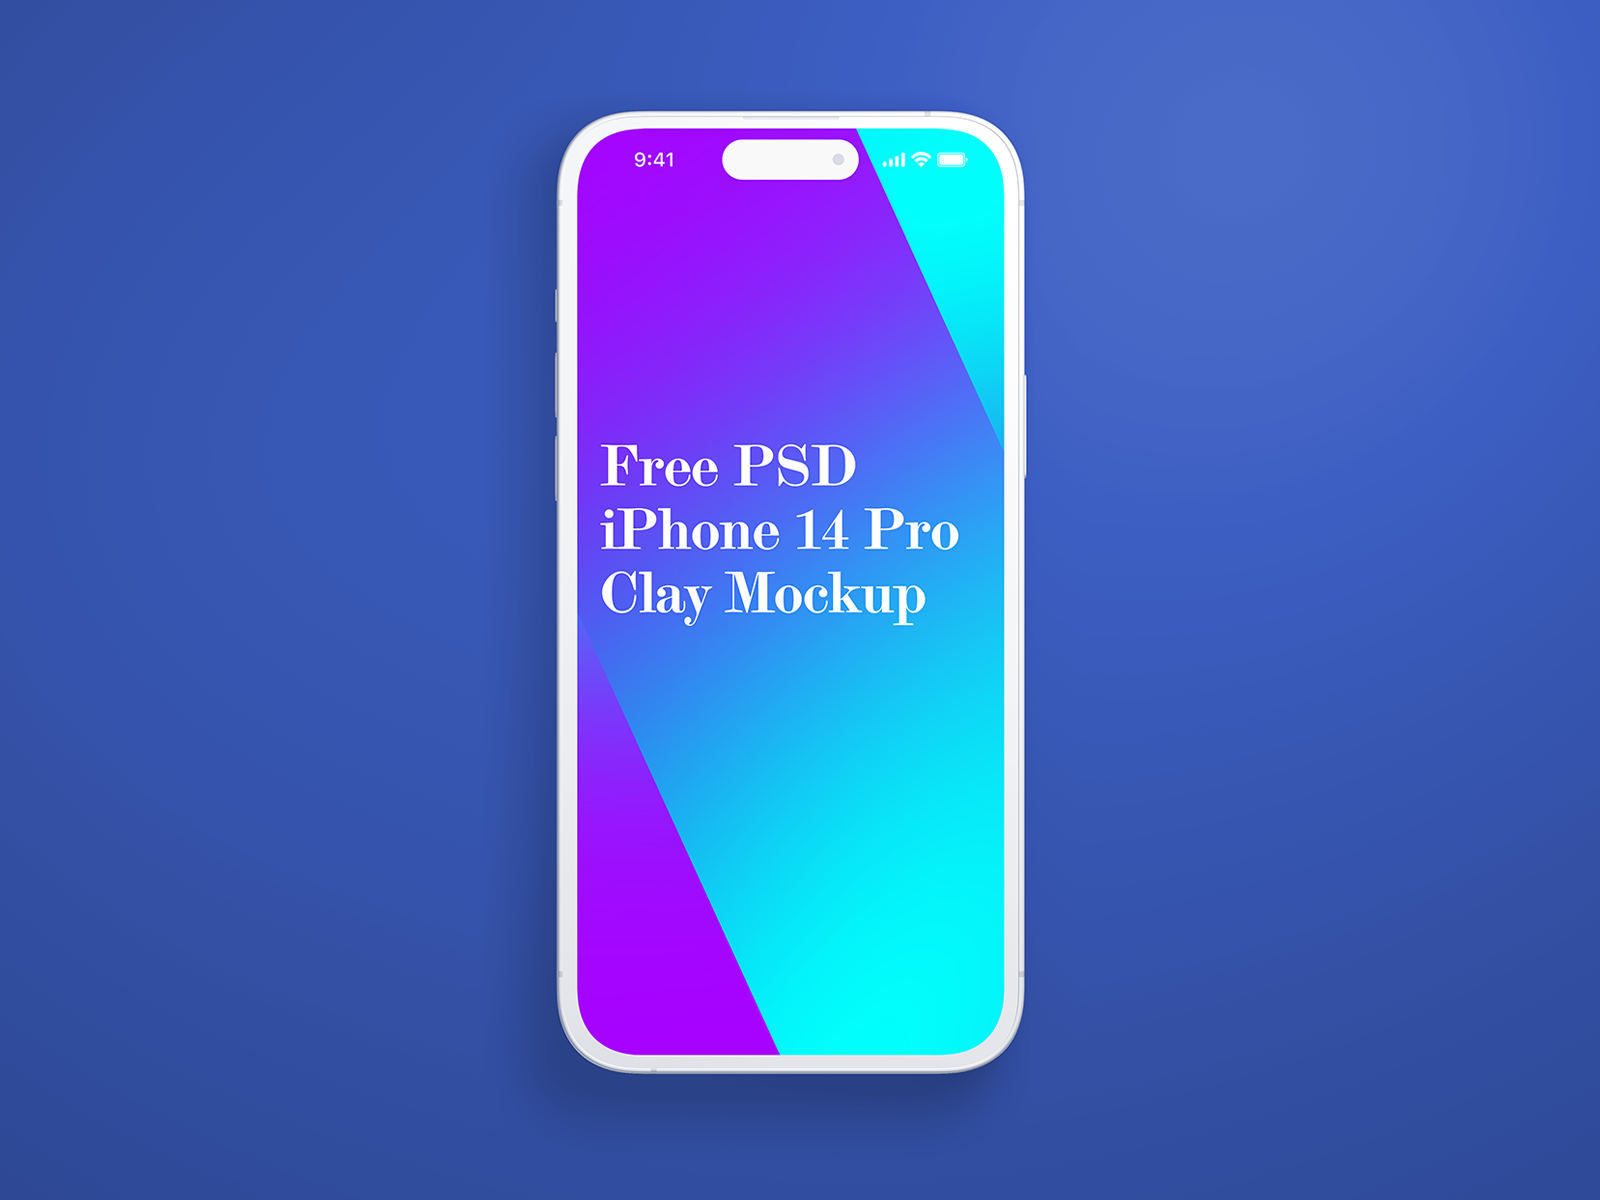 Free iPhone 14 Pro Realistic and Clay Mockup with Status Bar